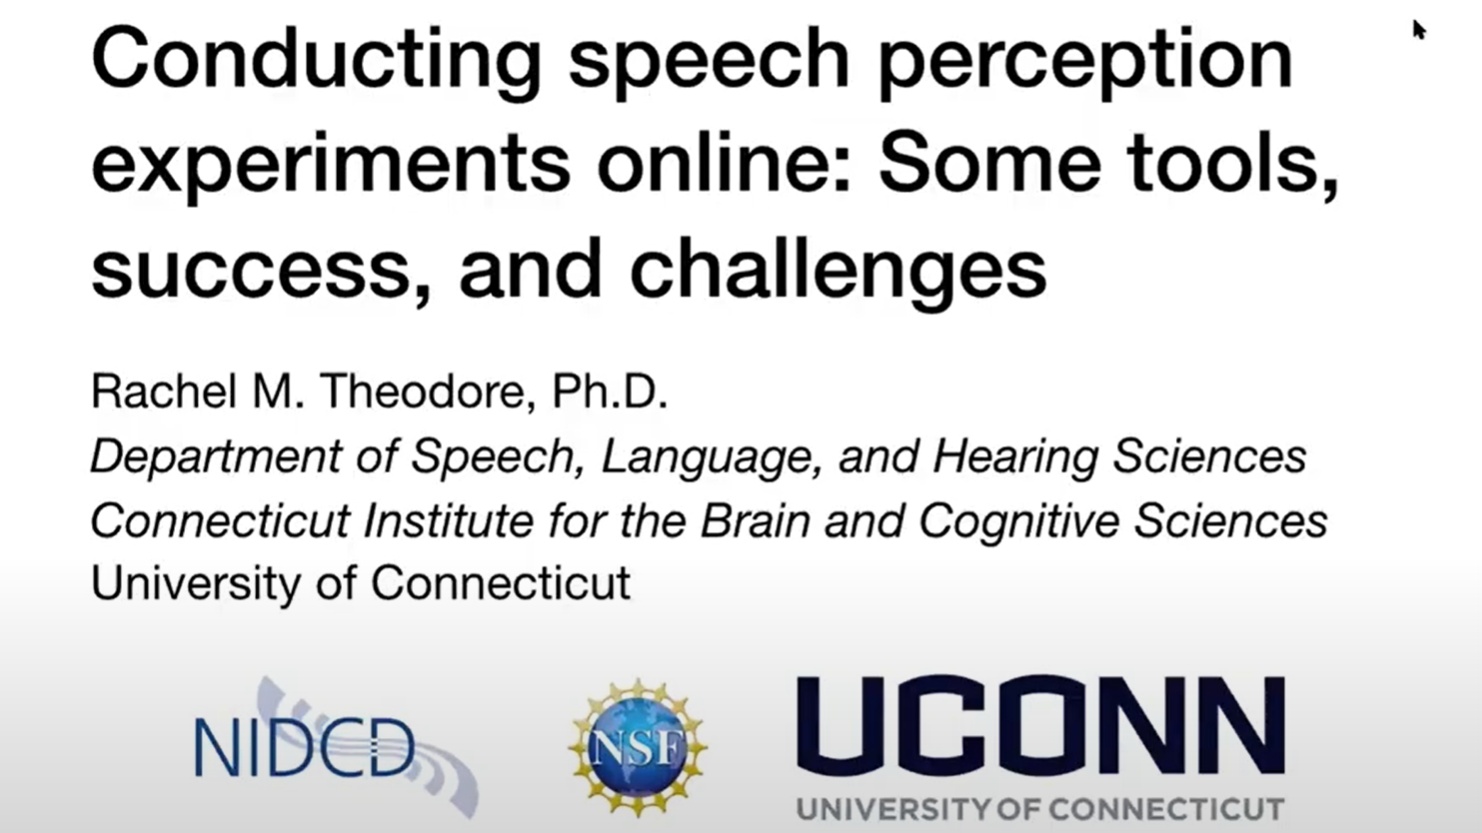 Con­duc­tion speech per­cep­tion exper­i­ments online: Some tools, suc­cess­es, and challenges